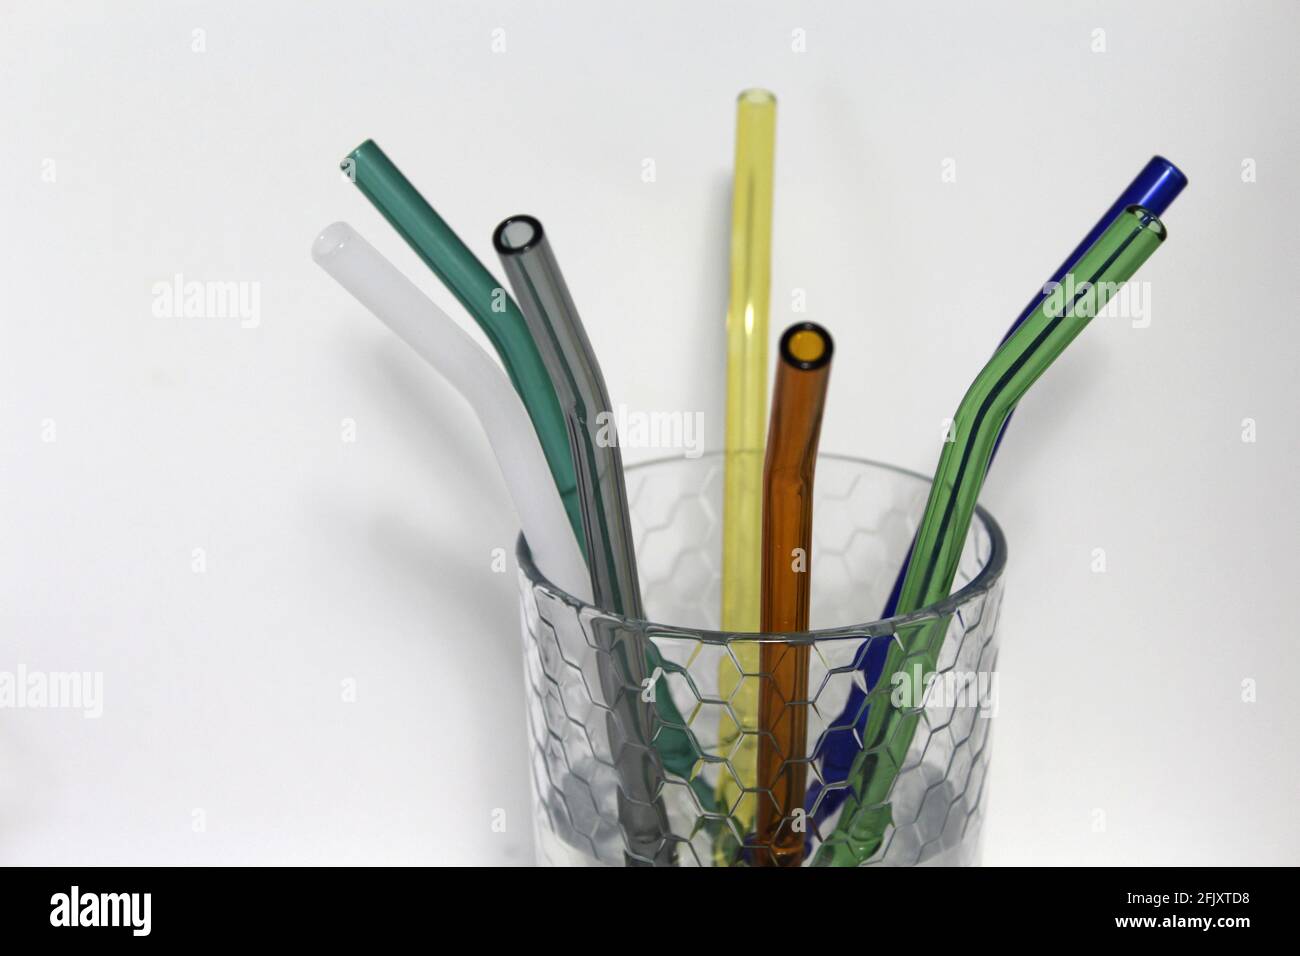 Colorful reusable glass straws in a clear glass cup. An alternative replacement for classic disposable plastic drinking straw great for the environment Stock Photo